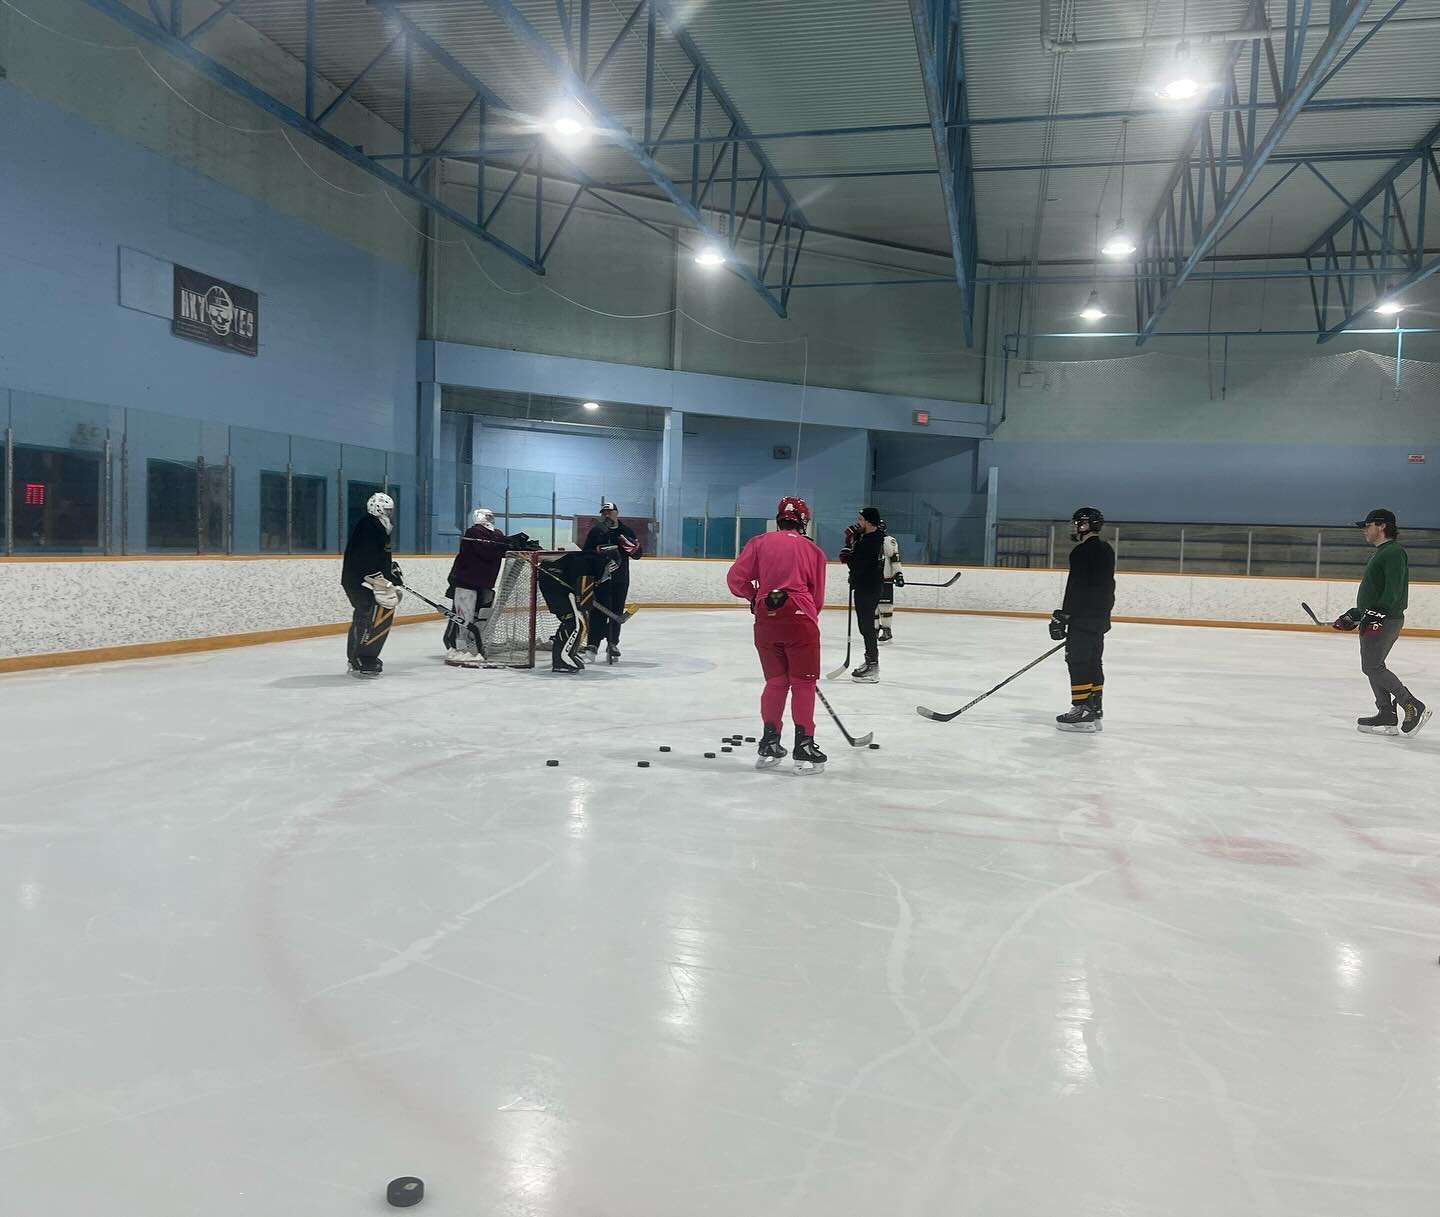 Some of our team got out on the ice with some of the @doghouse_hockey kids.  This was a fun skate #icetime #funskate #youthhockey #hockey #hkyyeg